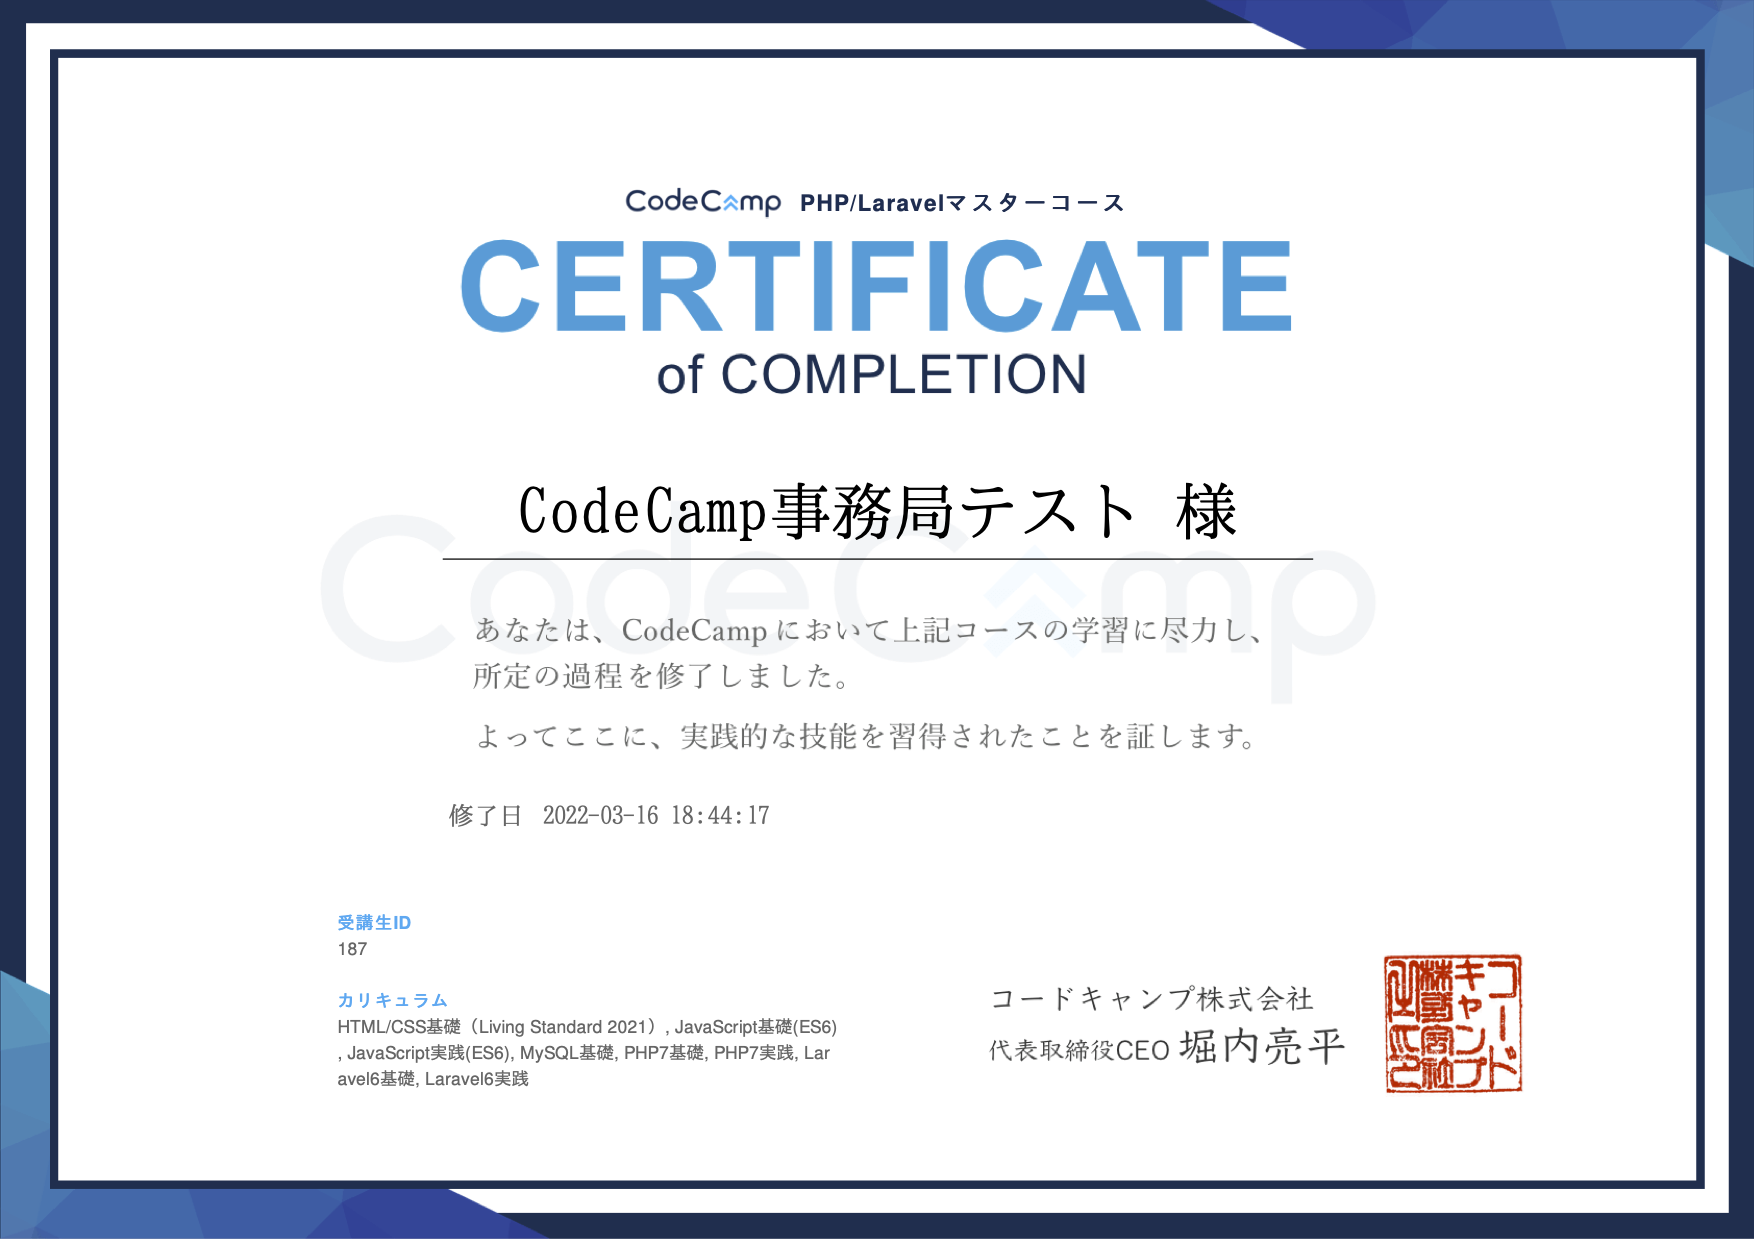 CertificateOfCompletion_sample.png